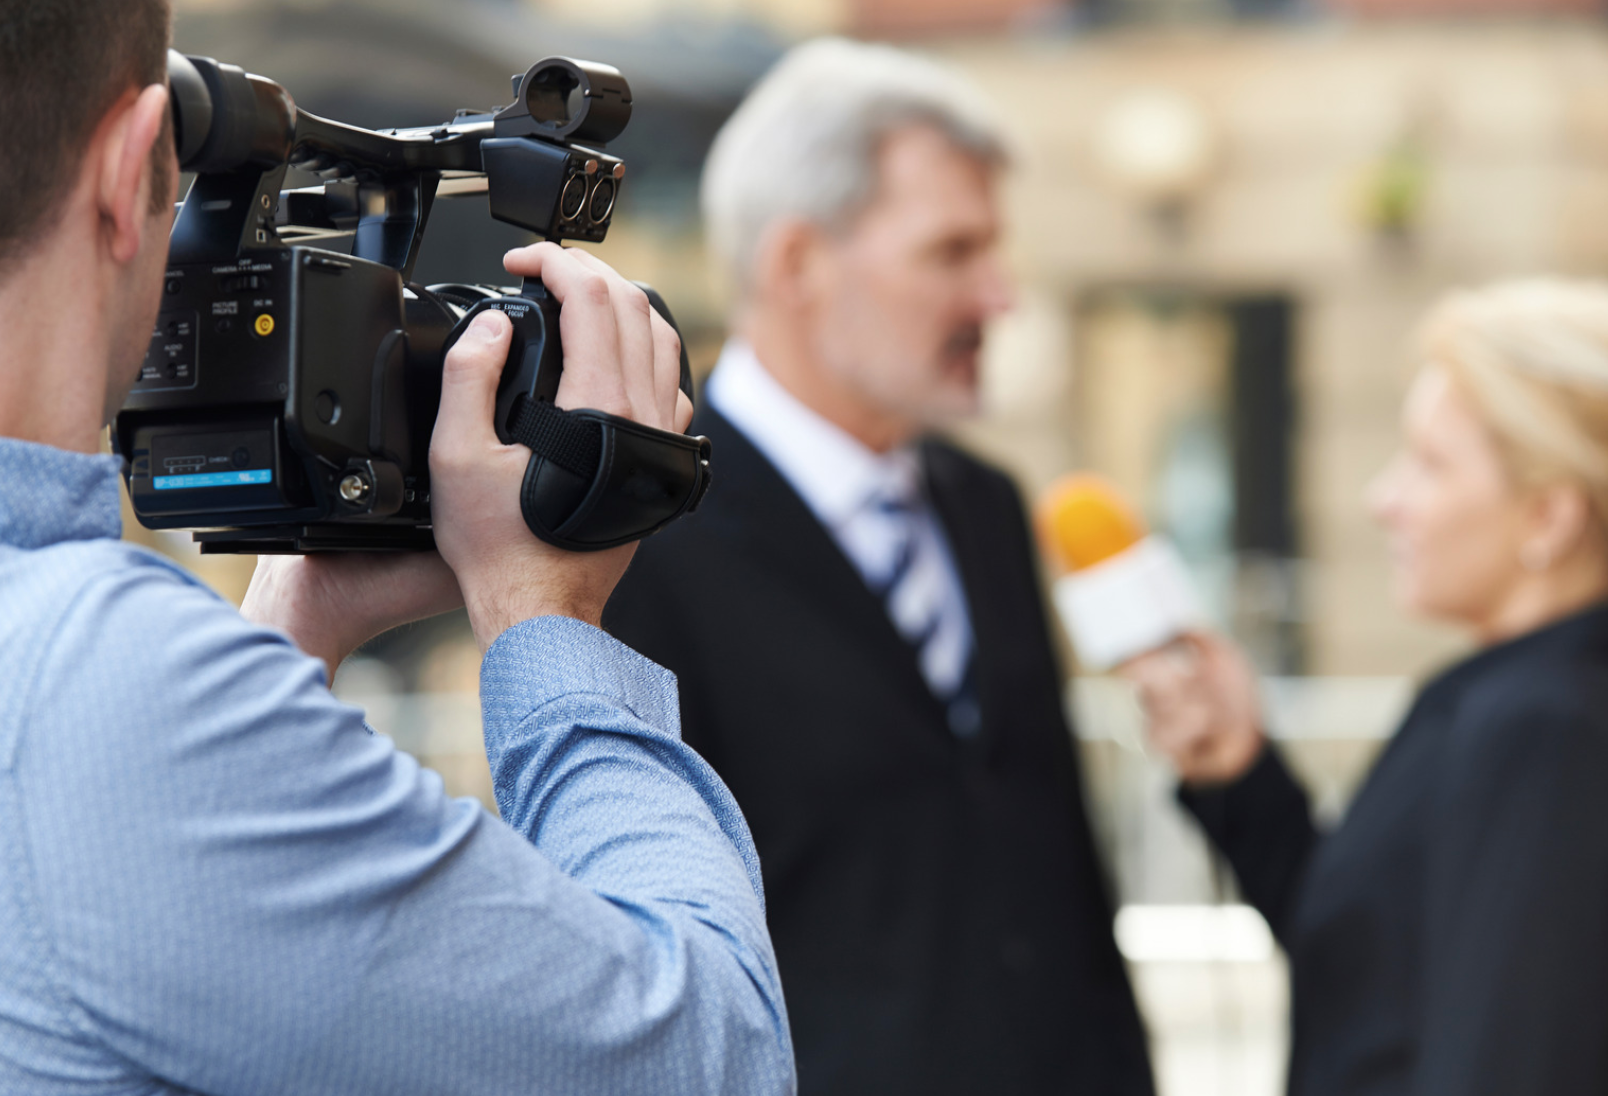 What Frustrates Journalists The Most During Media Interviews